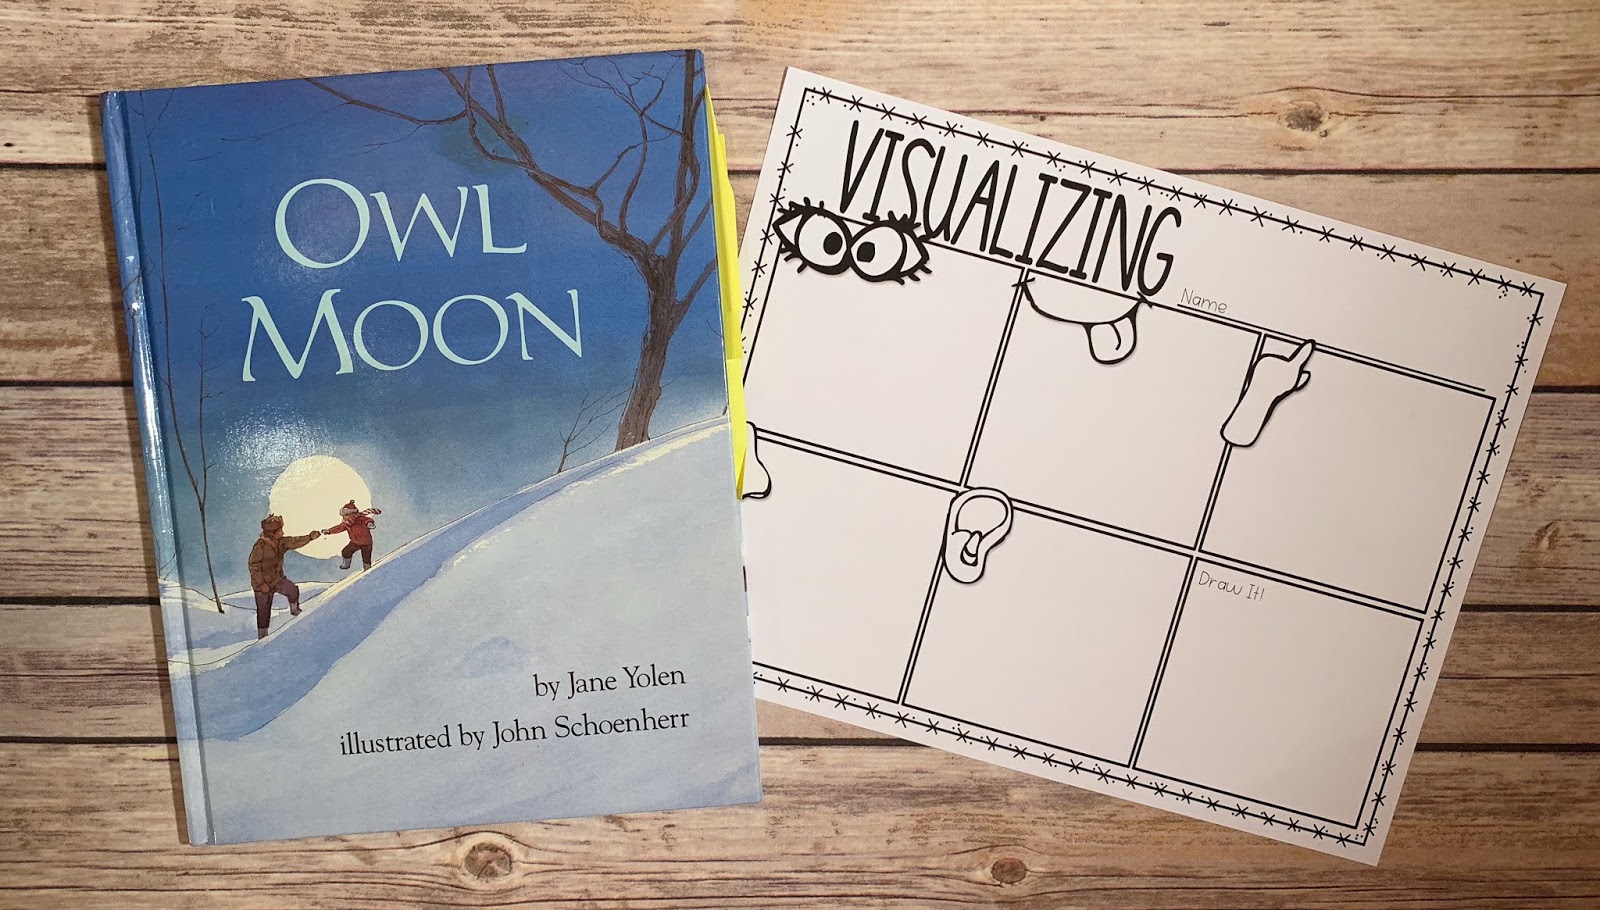 Mentor Text with text "Owl Moon" and Graphic Organizer with text "Visualizing"